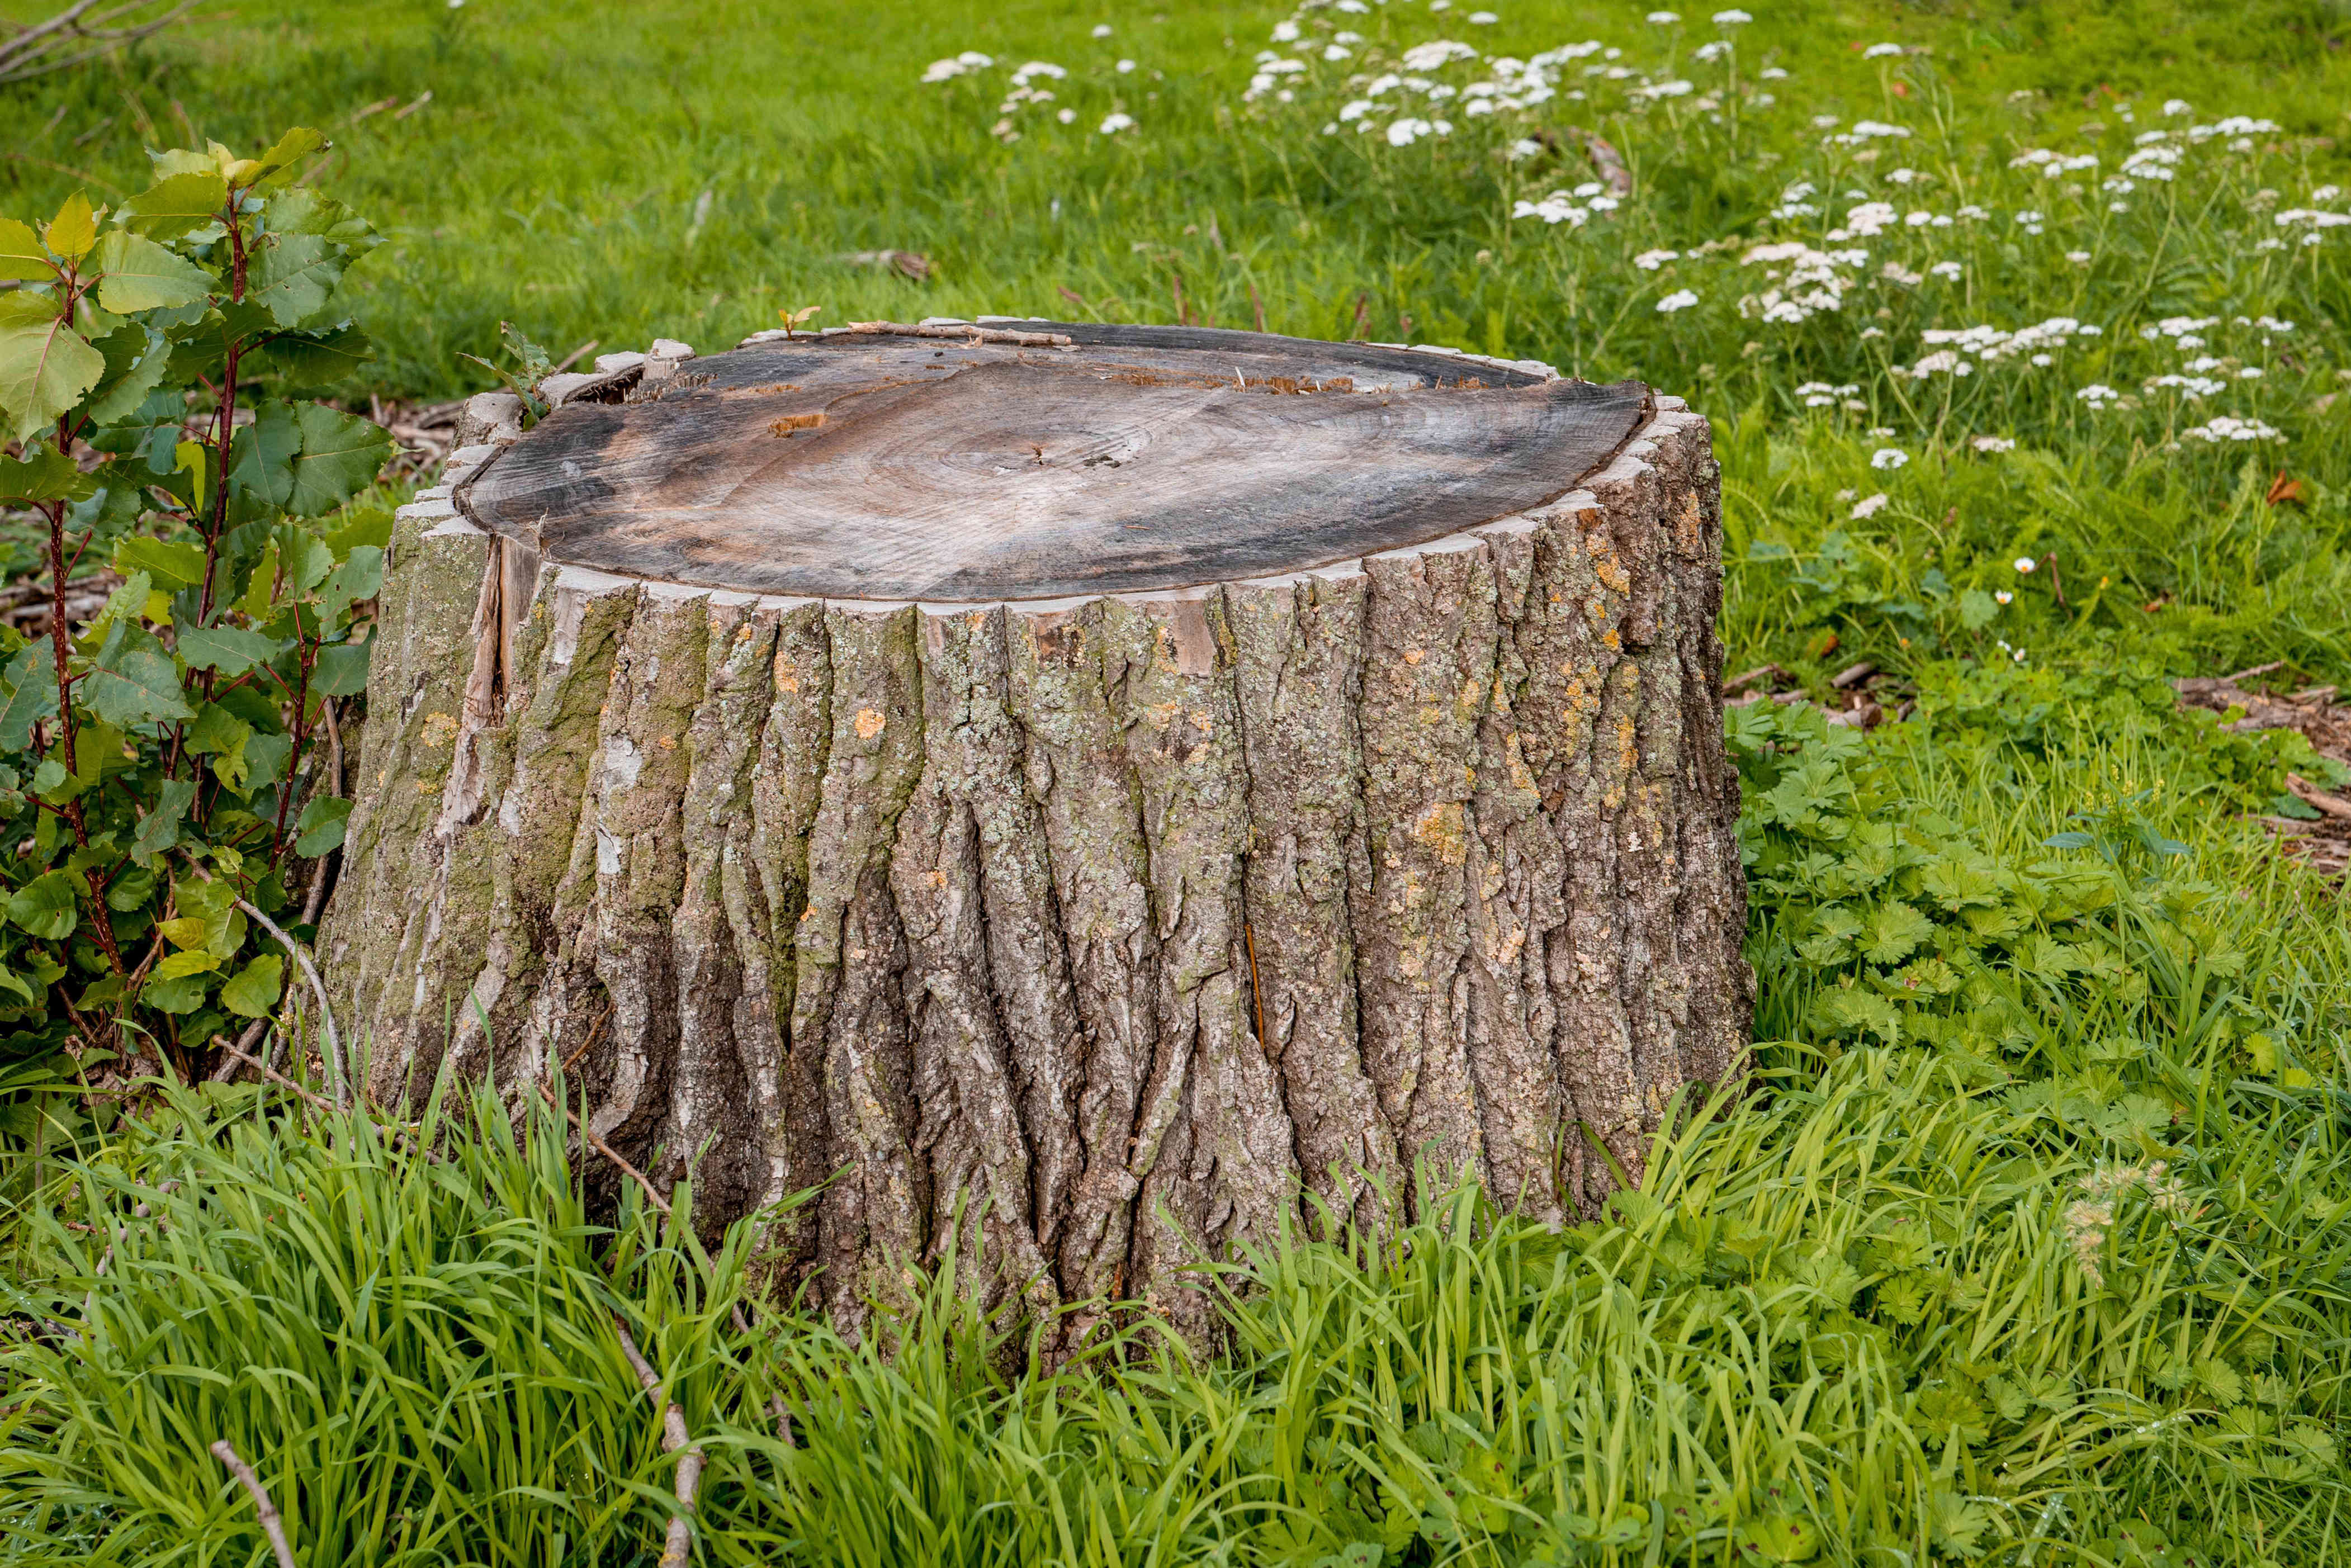 how to, 5 solutions for how to remove a tree stump from your yard safely